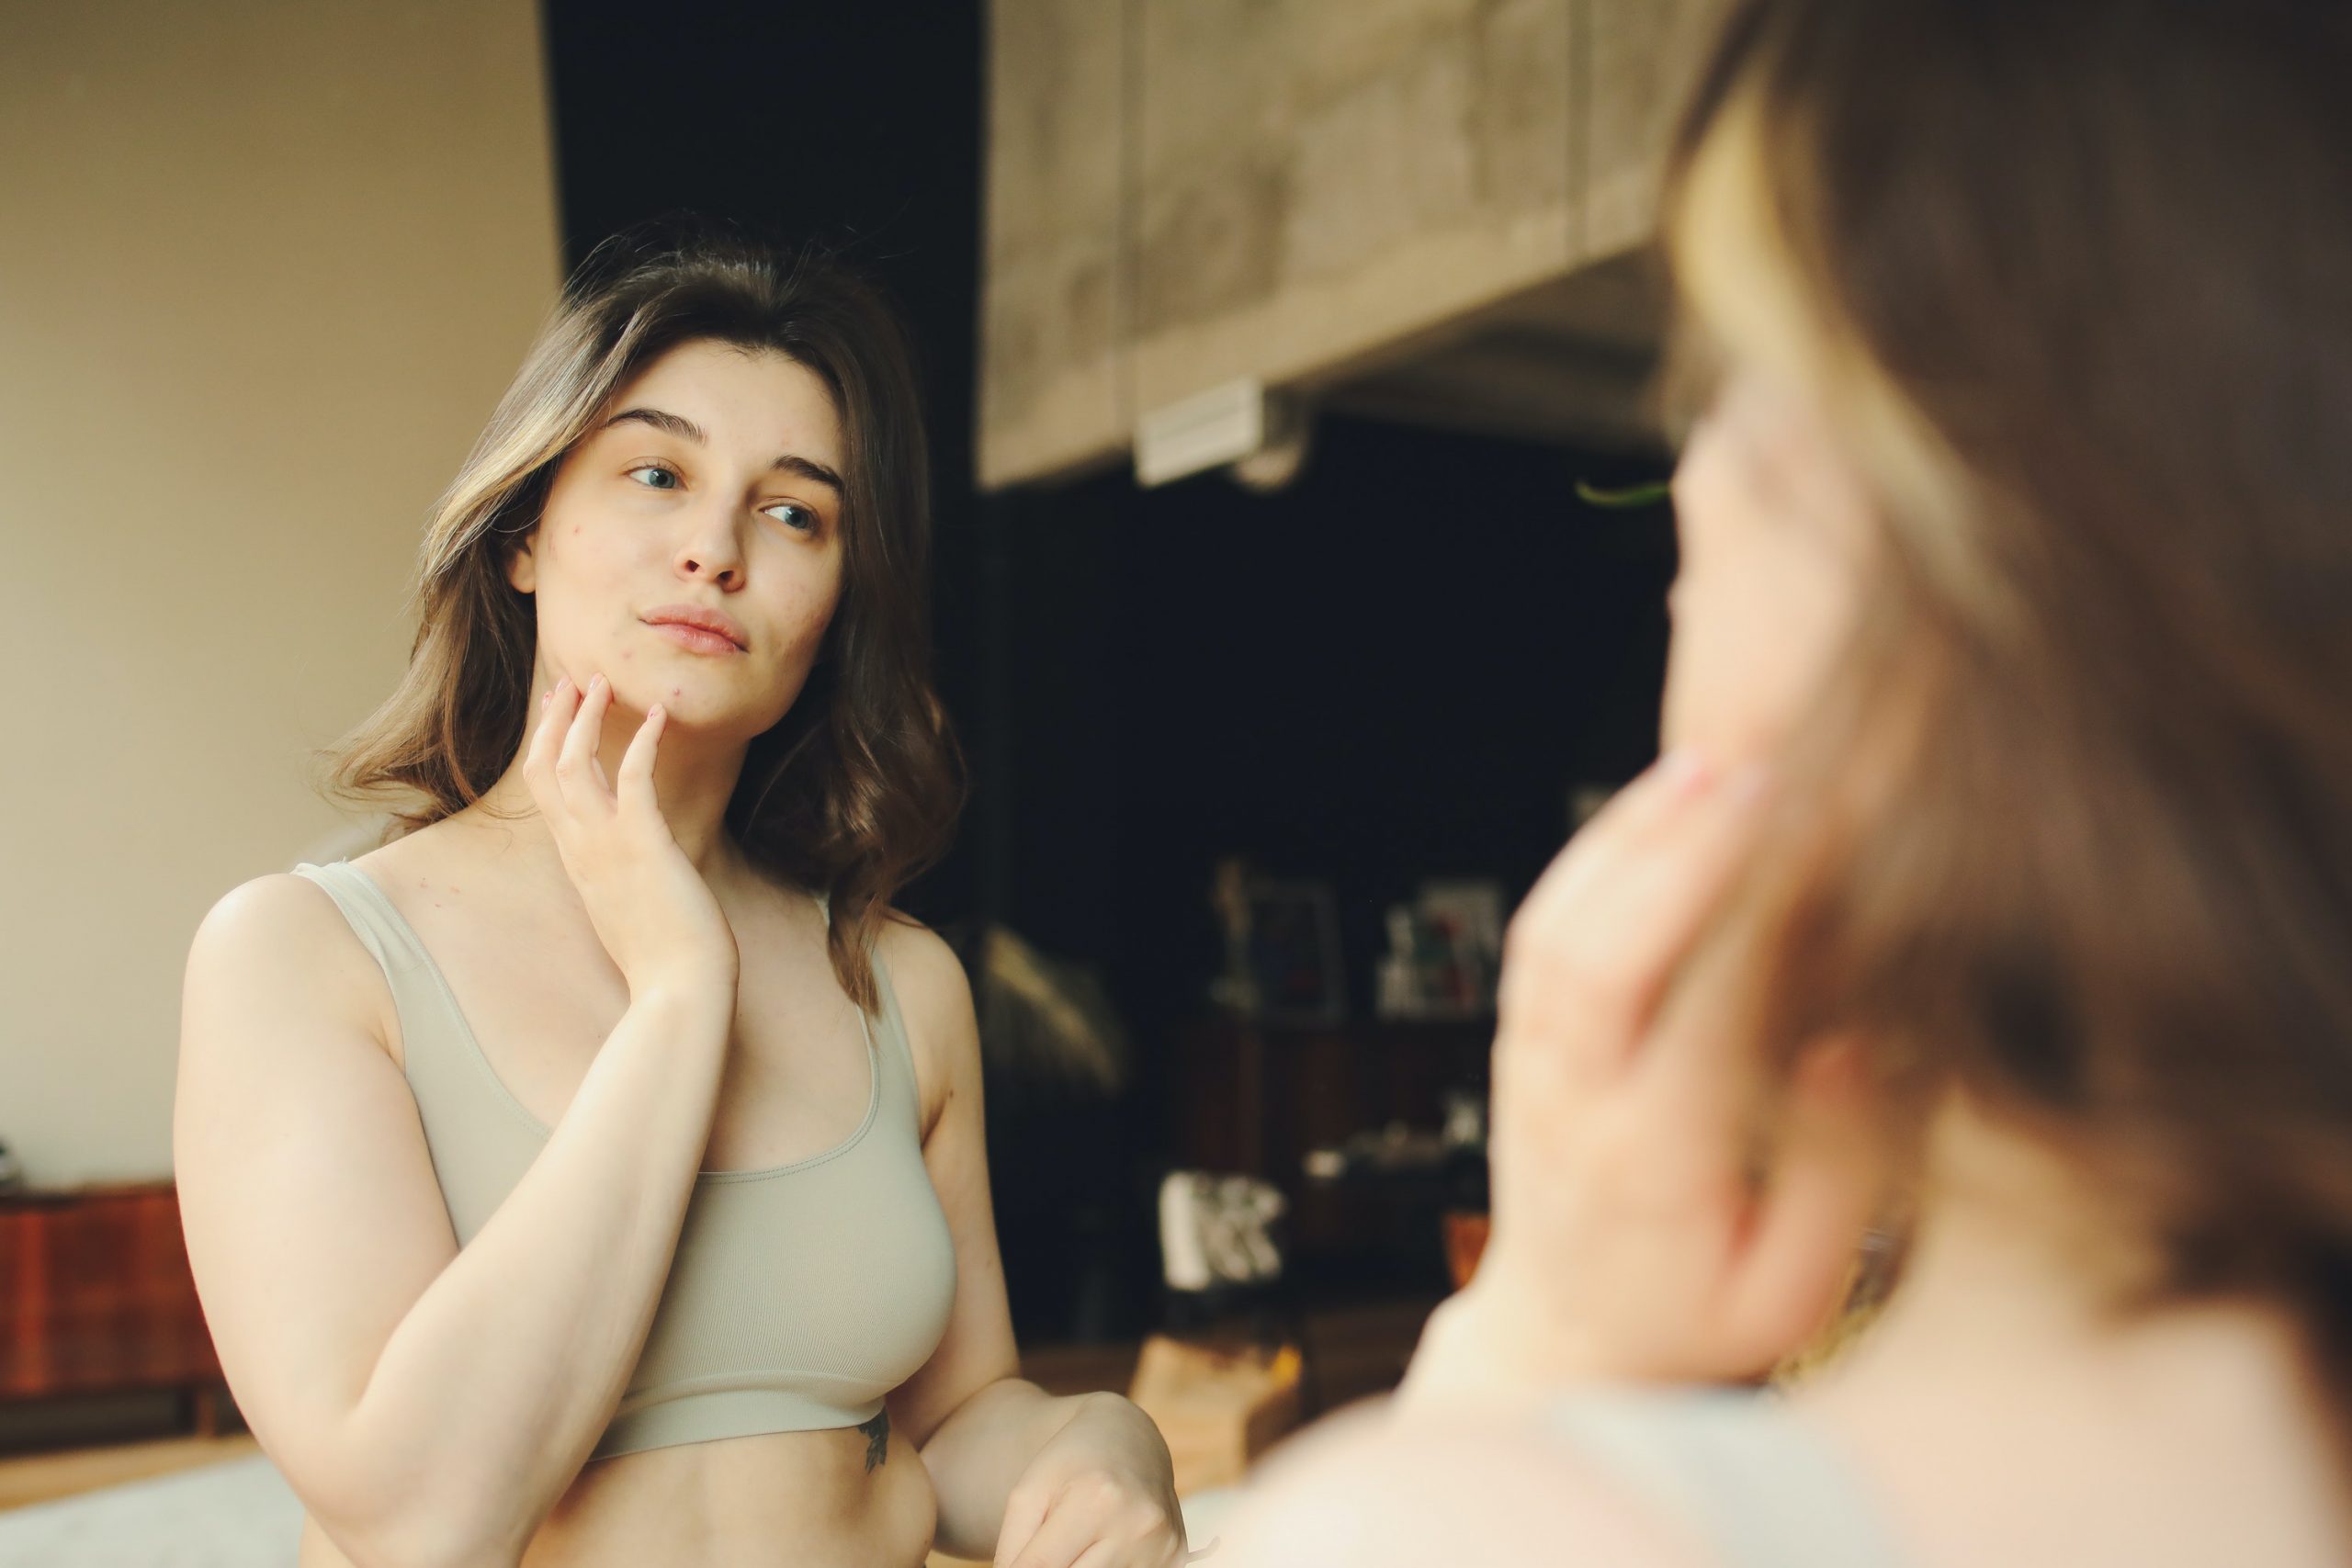 A young woman examines her complexion in the mirror for hormonal acne.